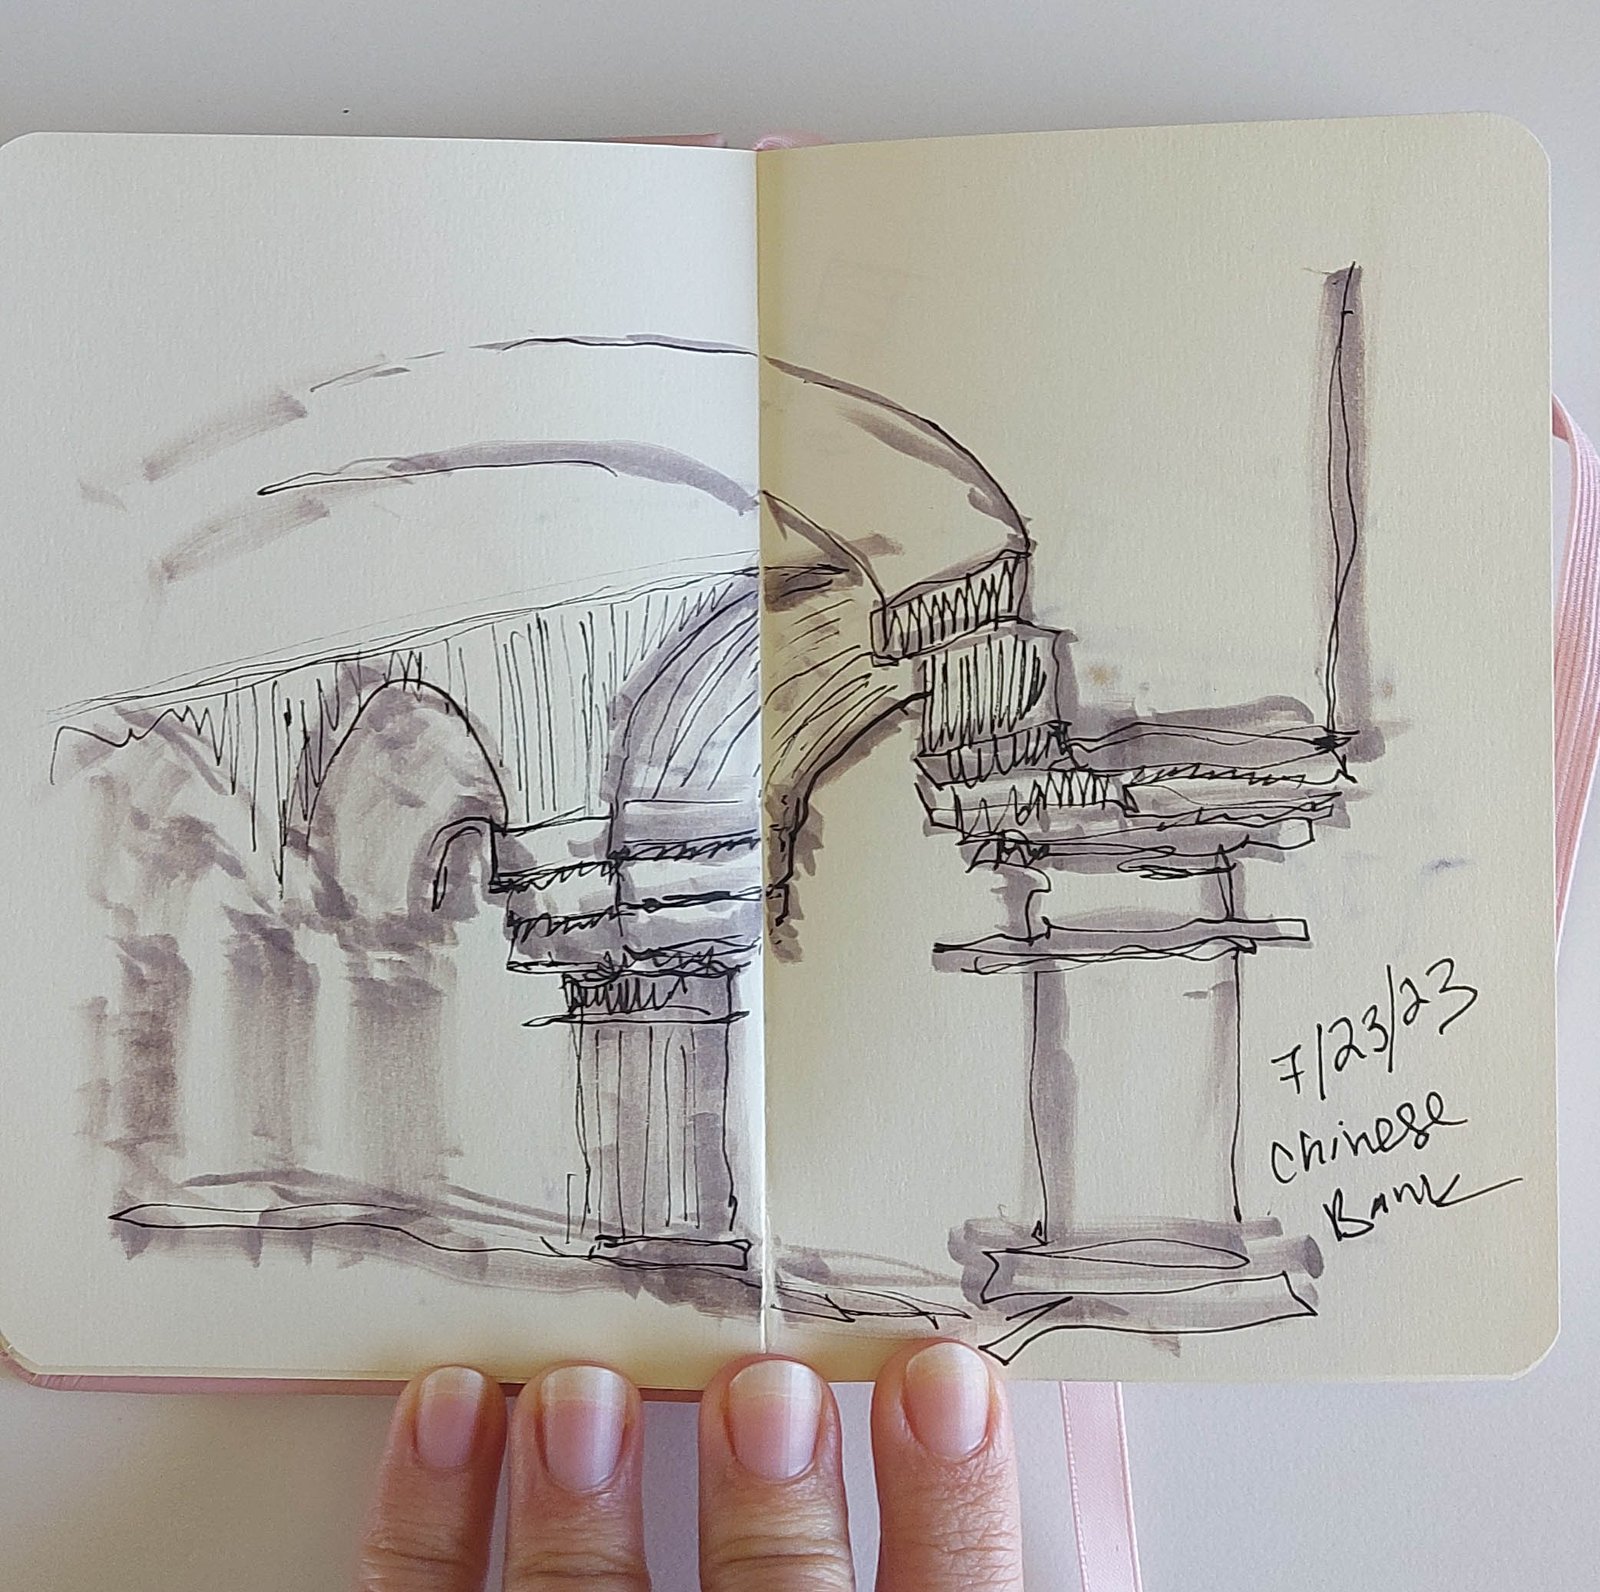 Sketching arches outside, training perspective